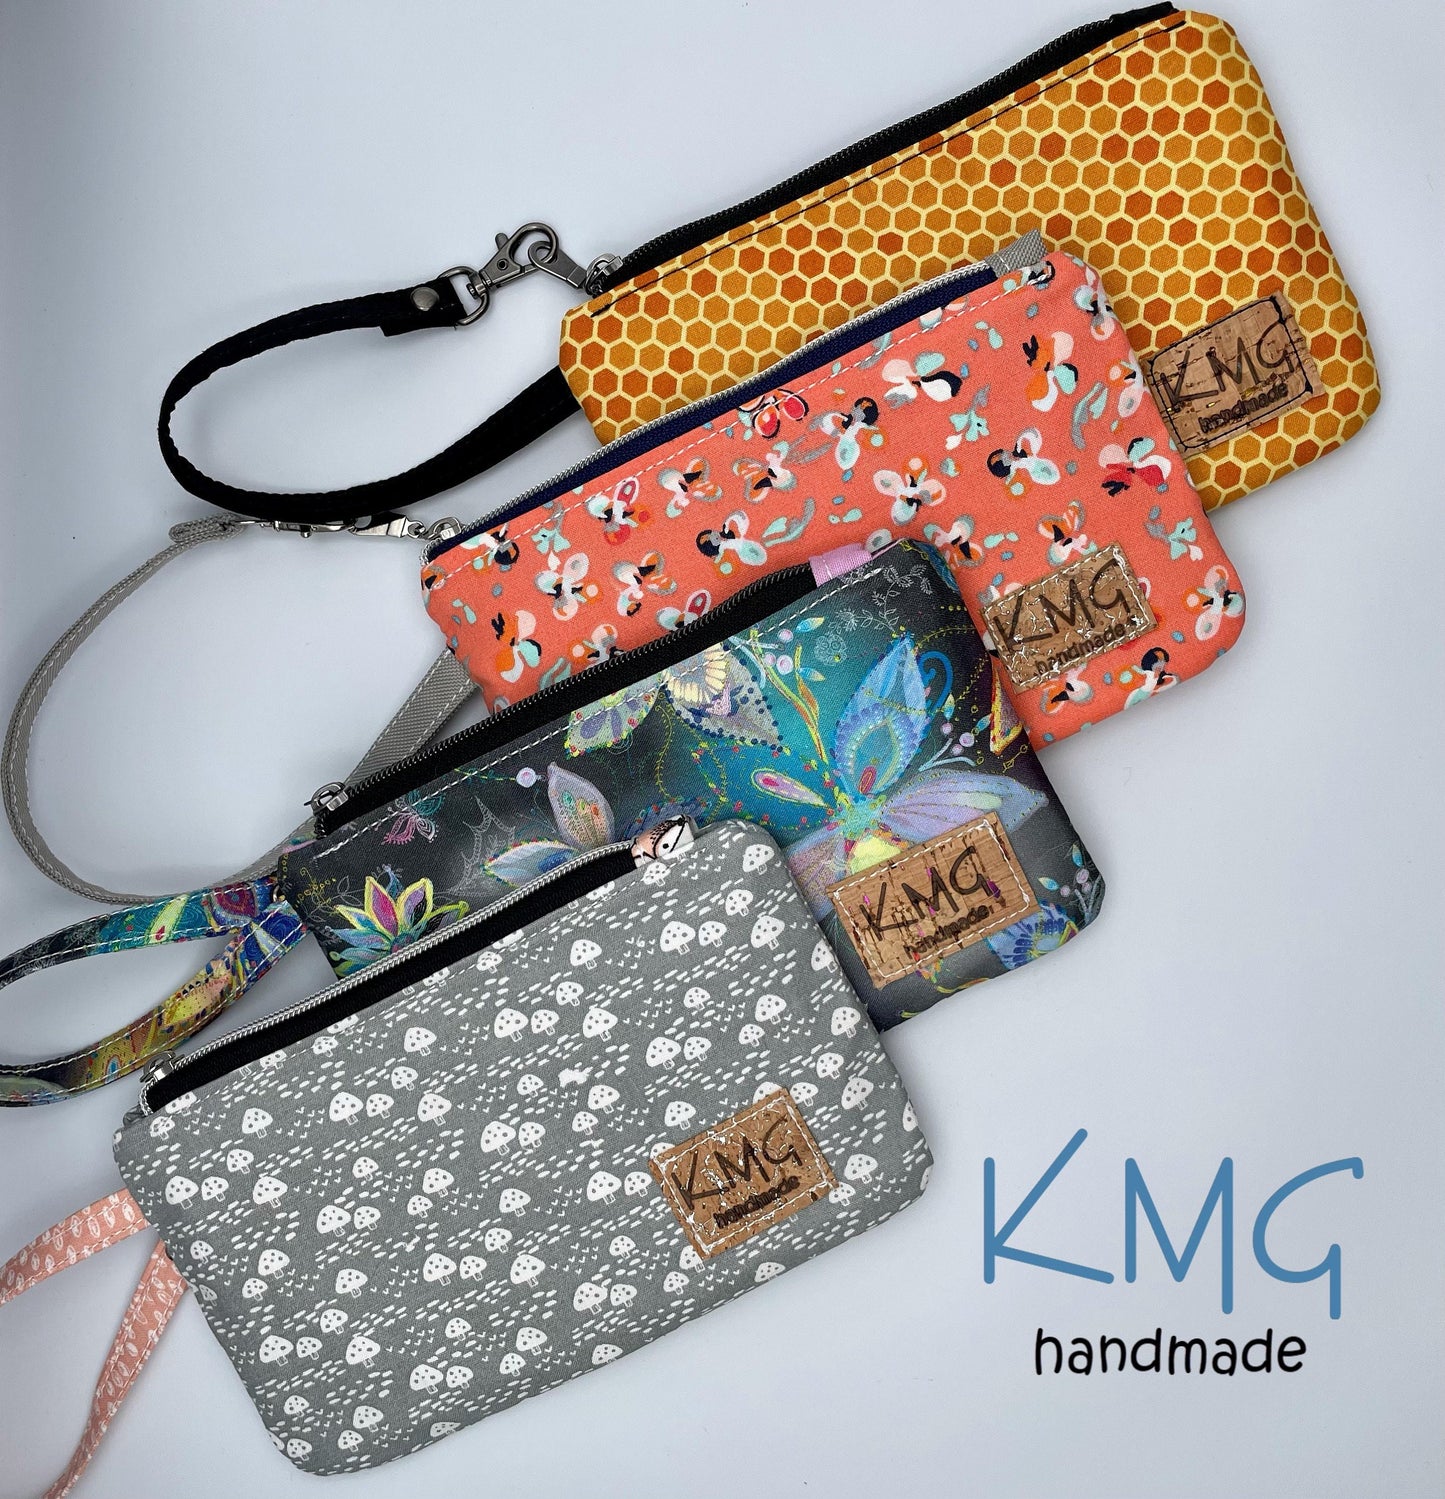 PDF Pattern and Video Tutorial - The Clip & Zip Wristlet by KMGhandmade